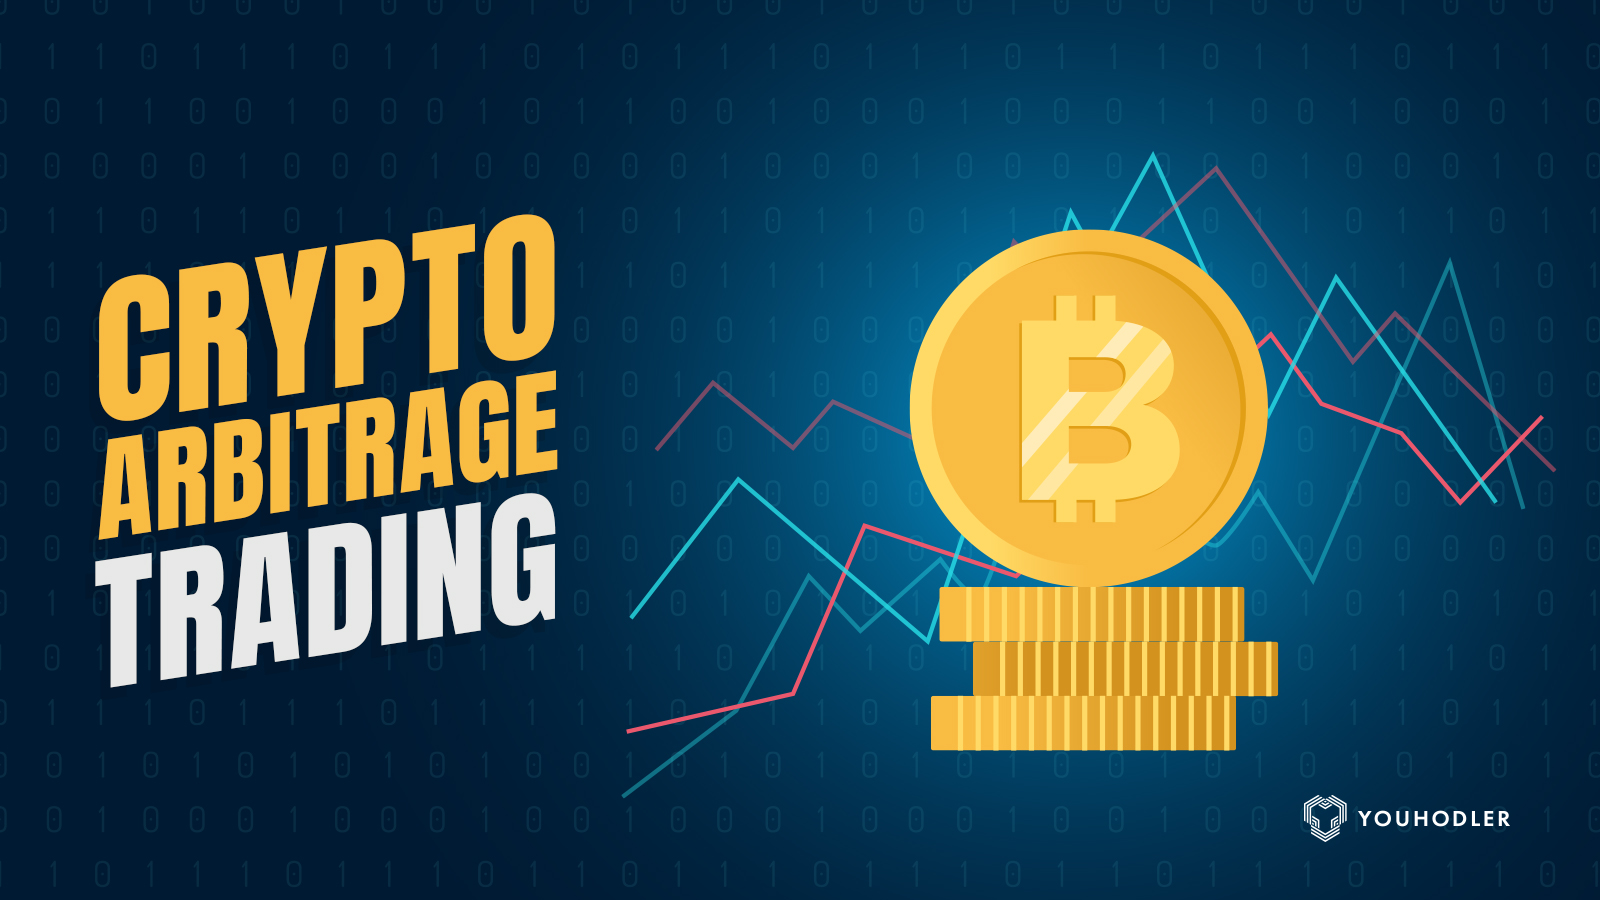 How to Find the Best Crypto Arbitrage Opportunities